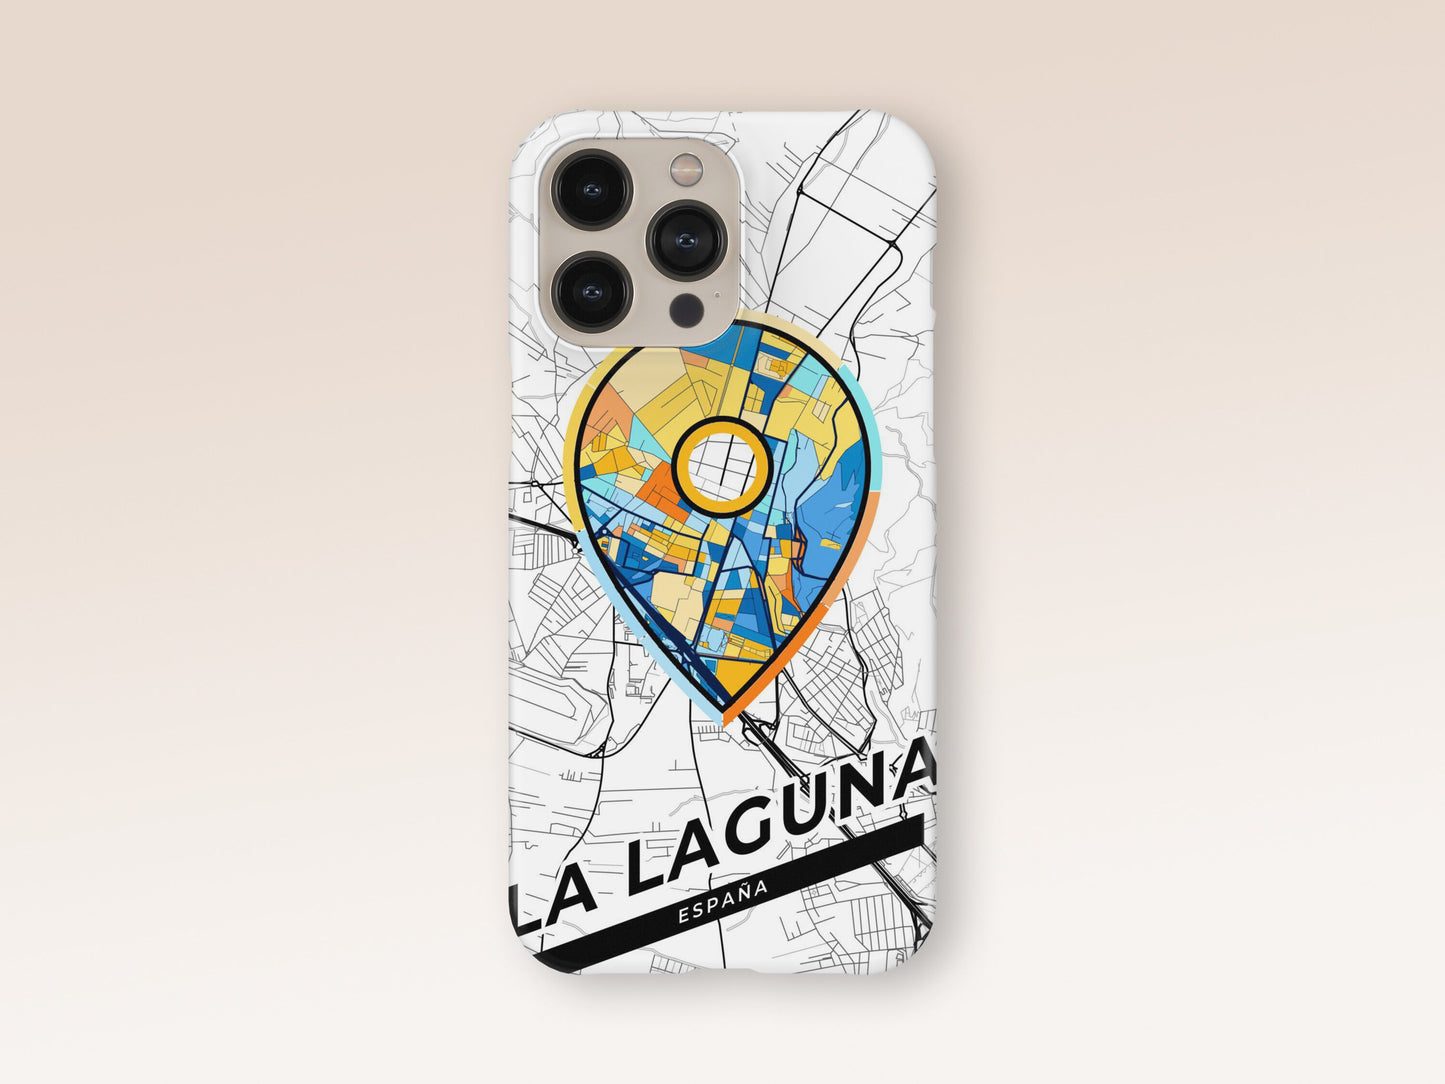 La Laguna Spain slim phone case with colorful icon. Birthday, wedding or housewarming gift. Couple match cases. 1